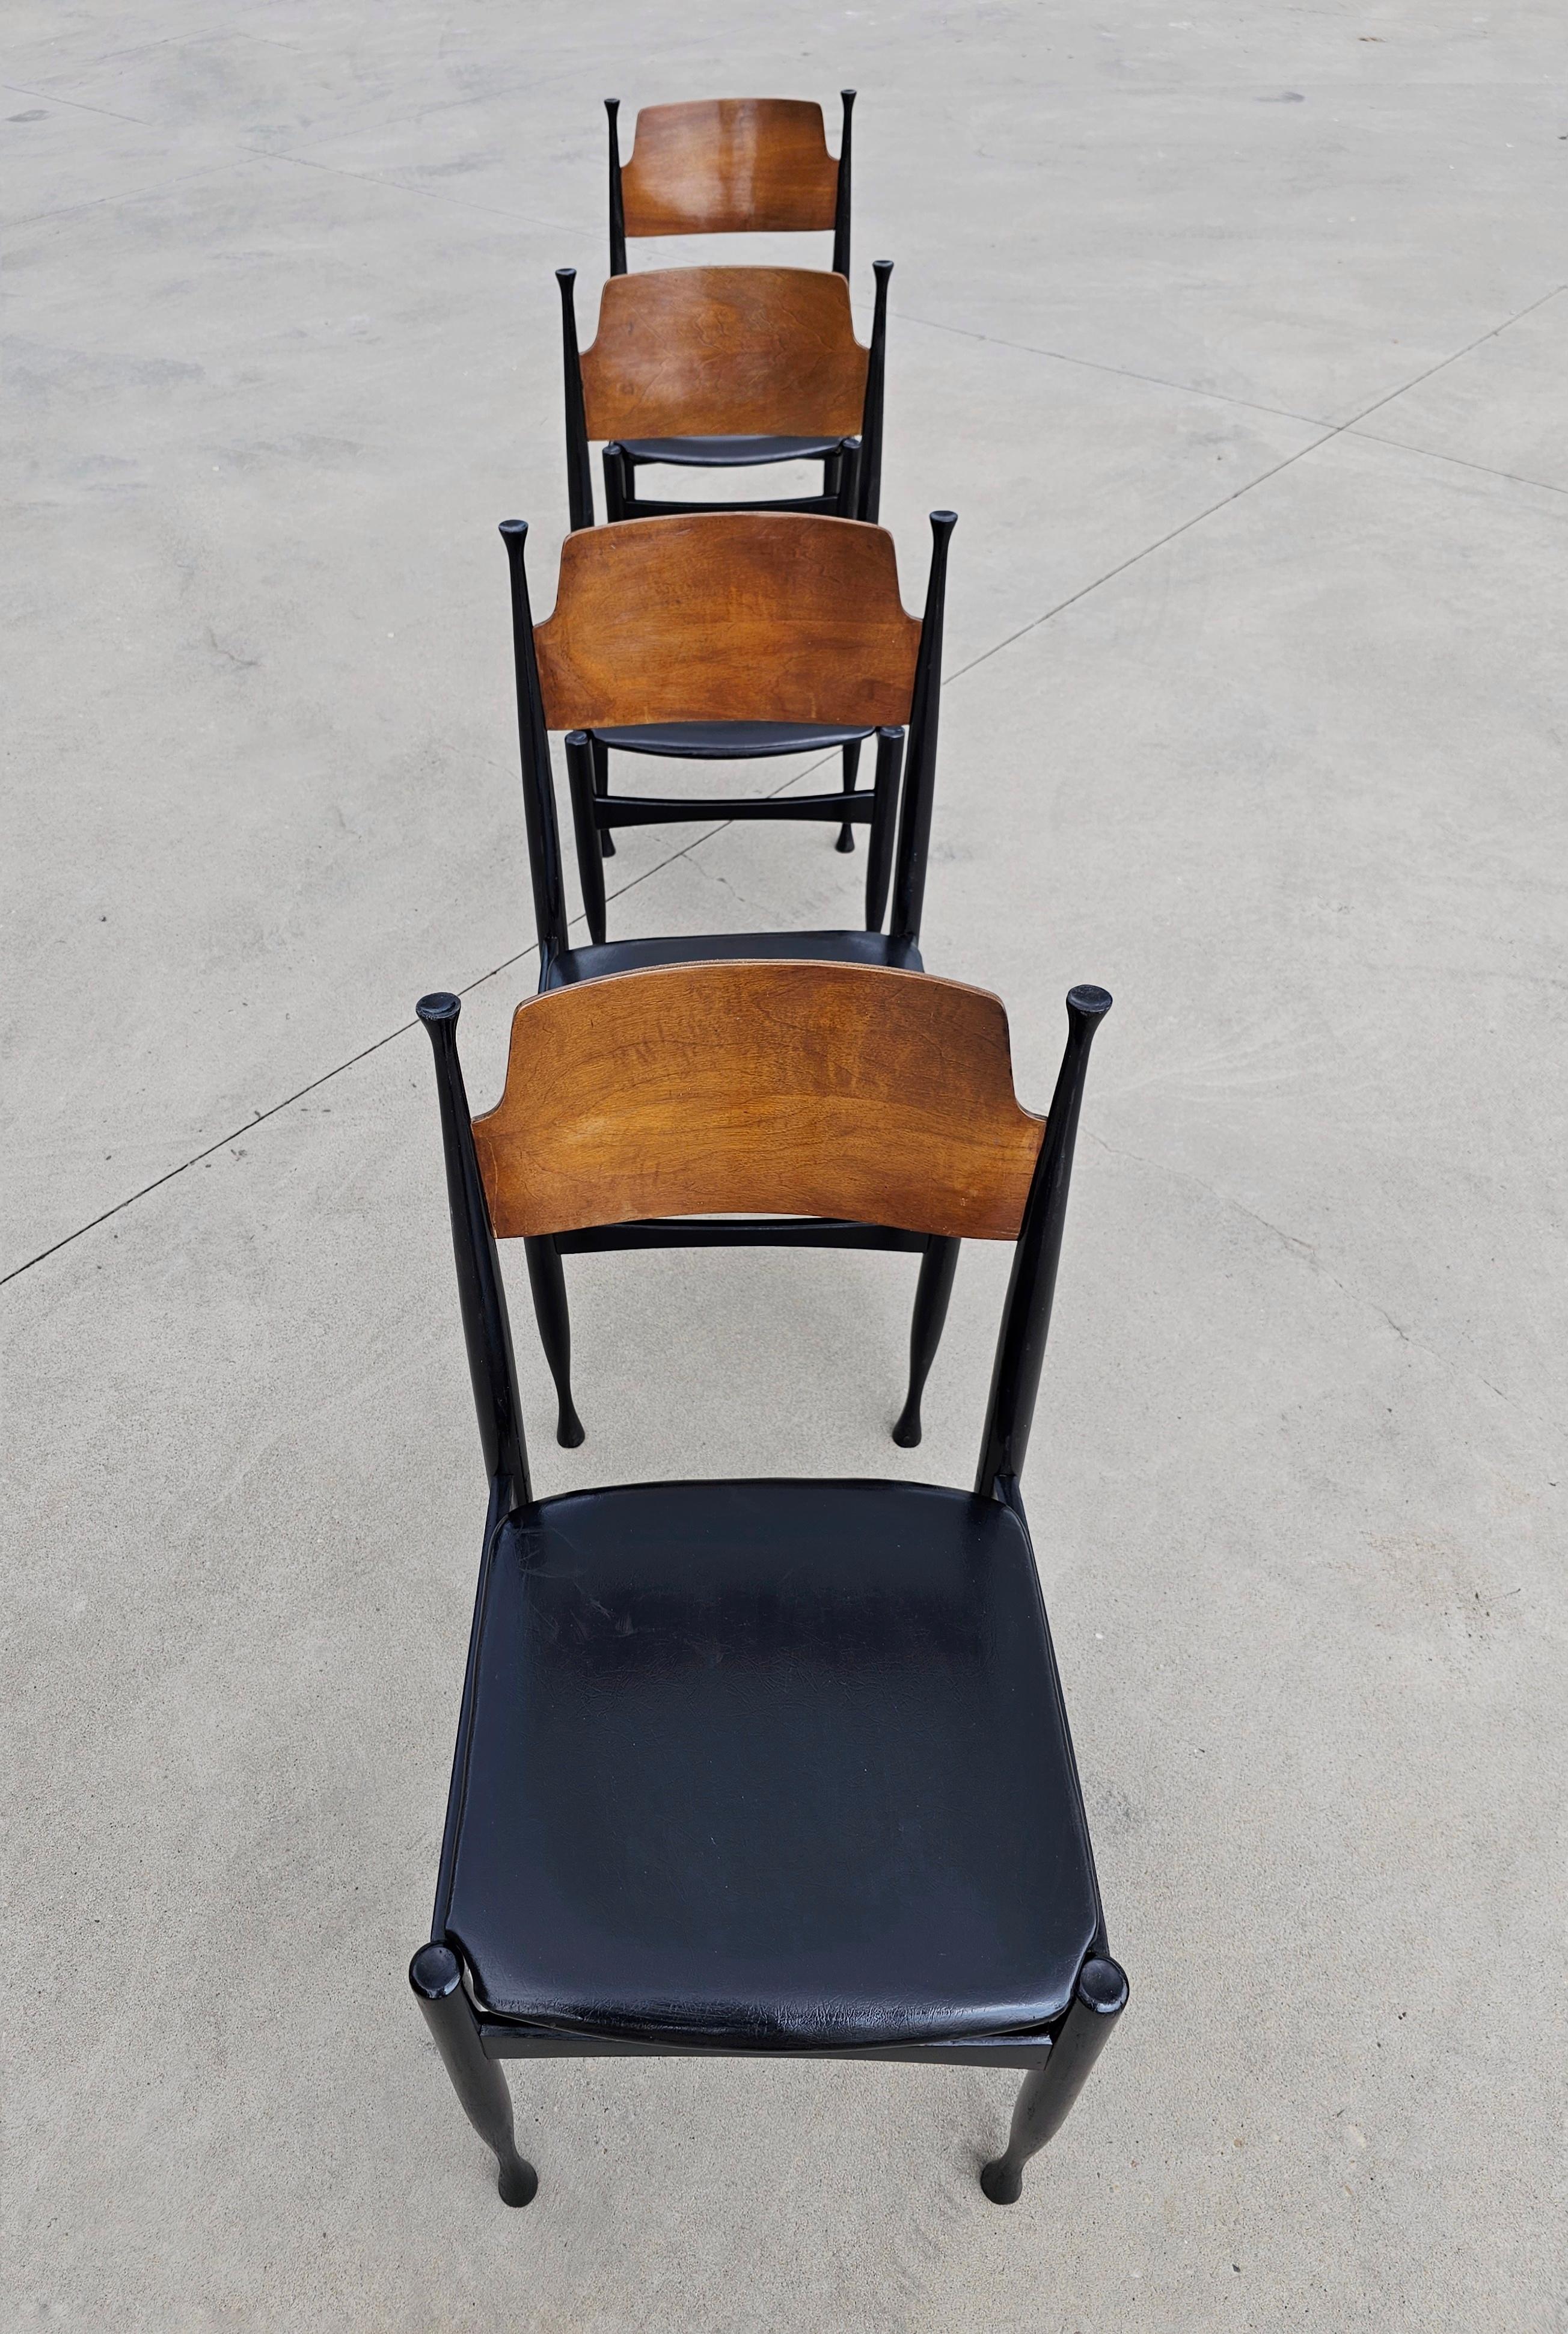 In this listing you will find a gorgeous and very rare set of 4 Mid-Century Modern dining chairs in style of Paolo Buffa. They feature construction in solid wood, painted black, the backrest is left in natural wood colour, while the seats are